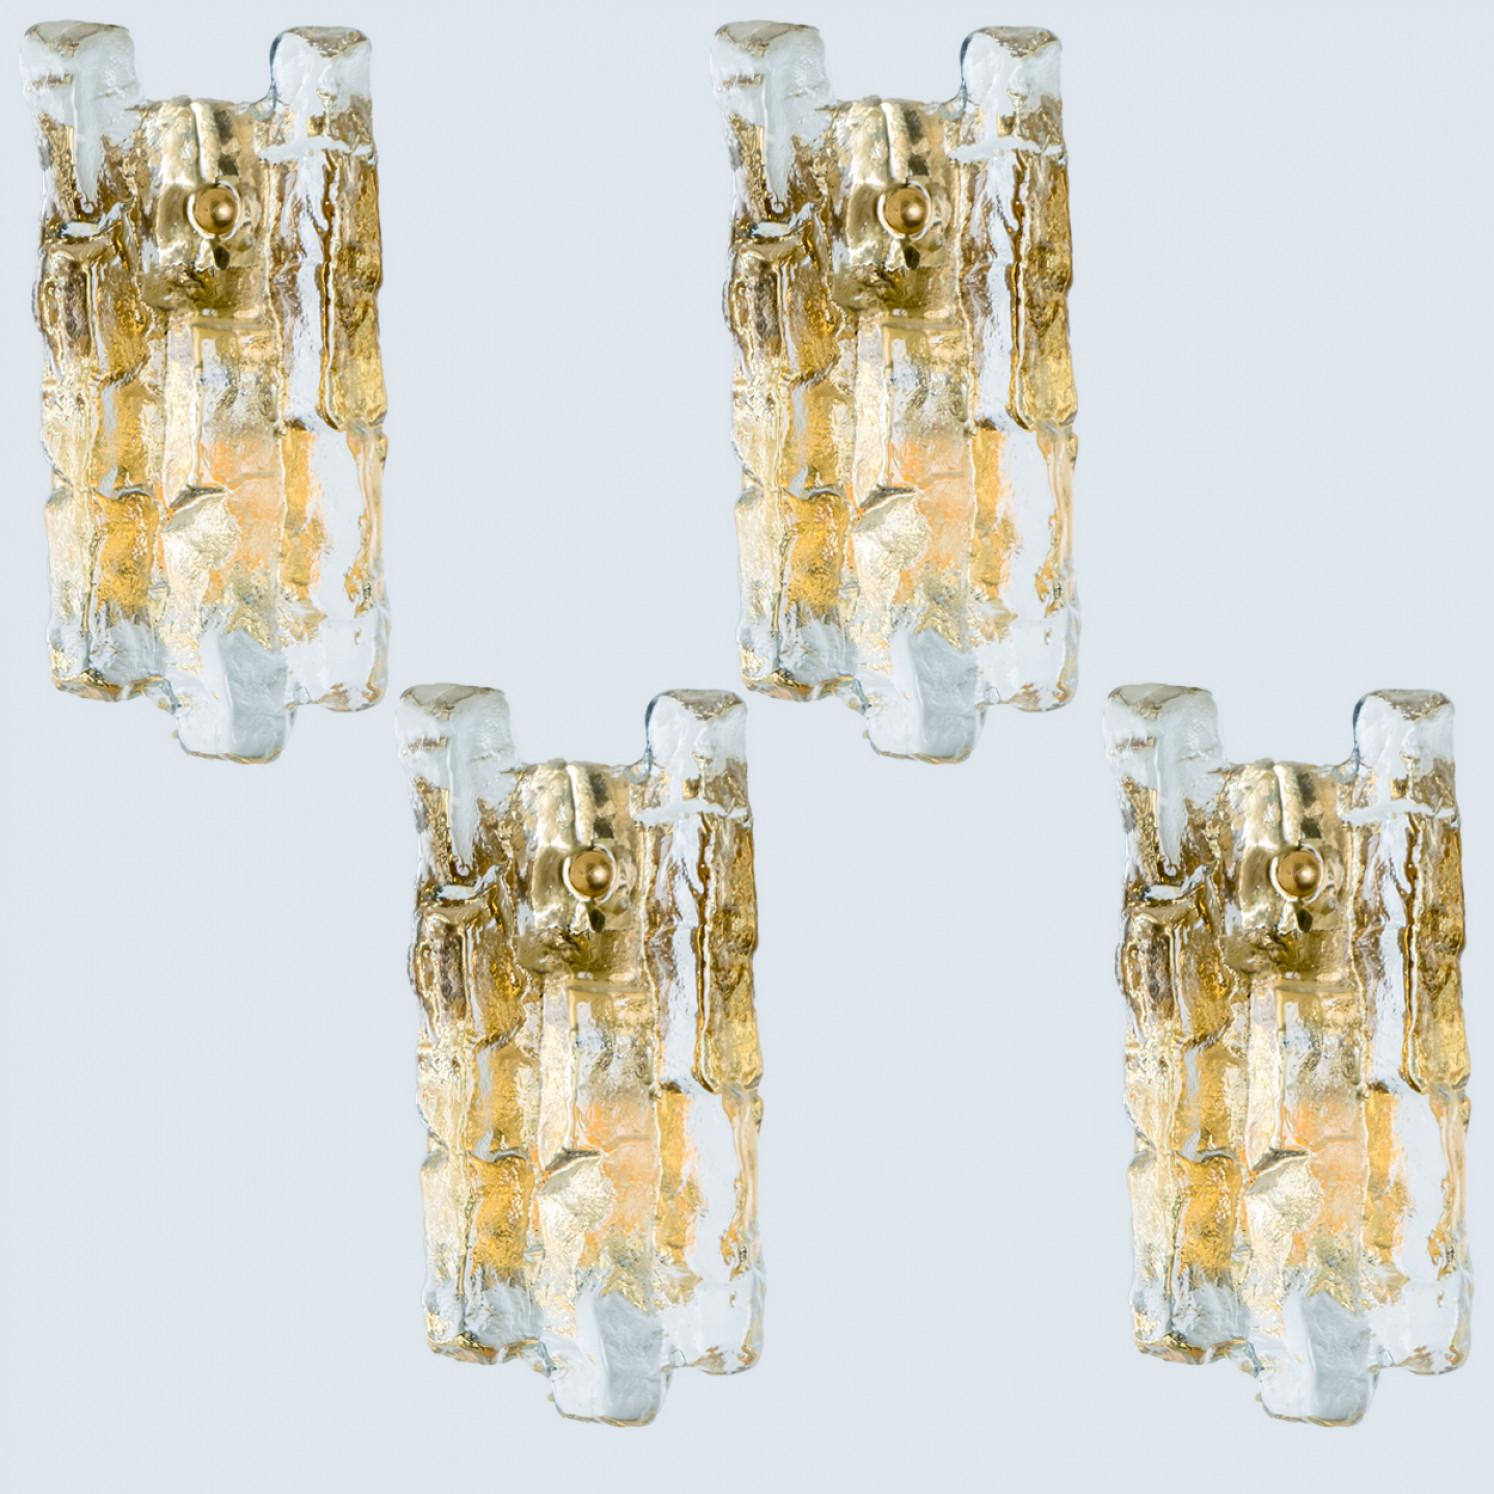 Textured Ice glass Gold Wall Lights Kalmar, 1970s For Sale 7